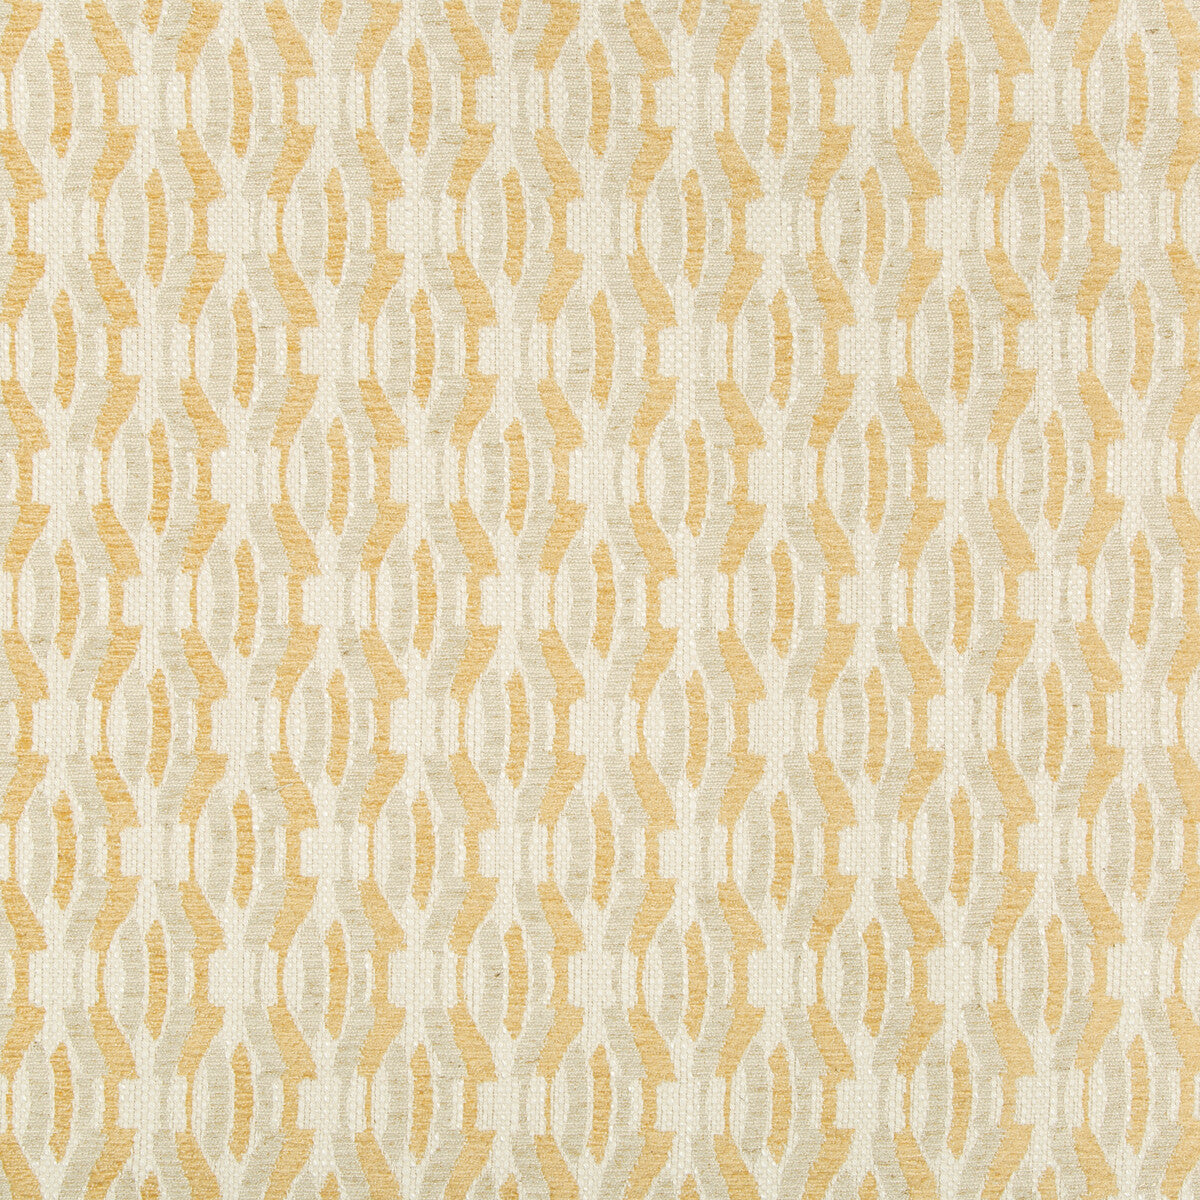 Agate Weave fabric in gold color - pattern GWF-3748.44.0 - by Lee Jofa Modern in the Gems collection